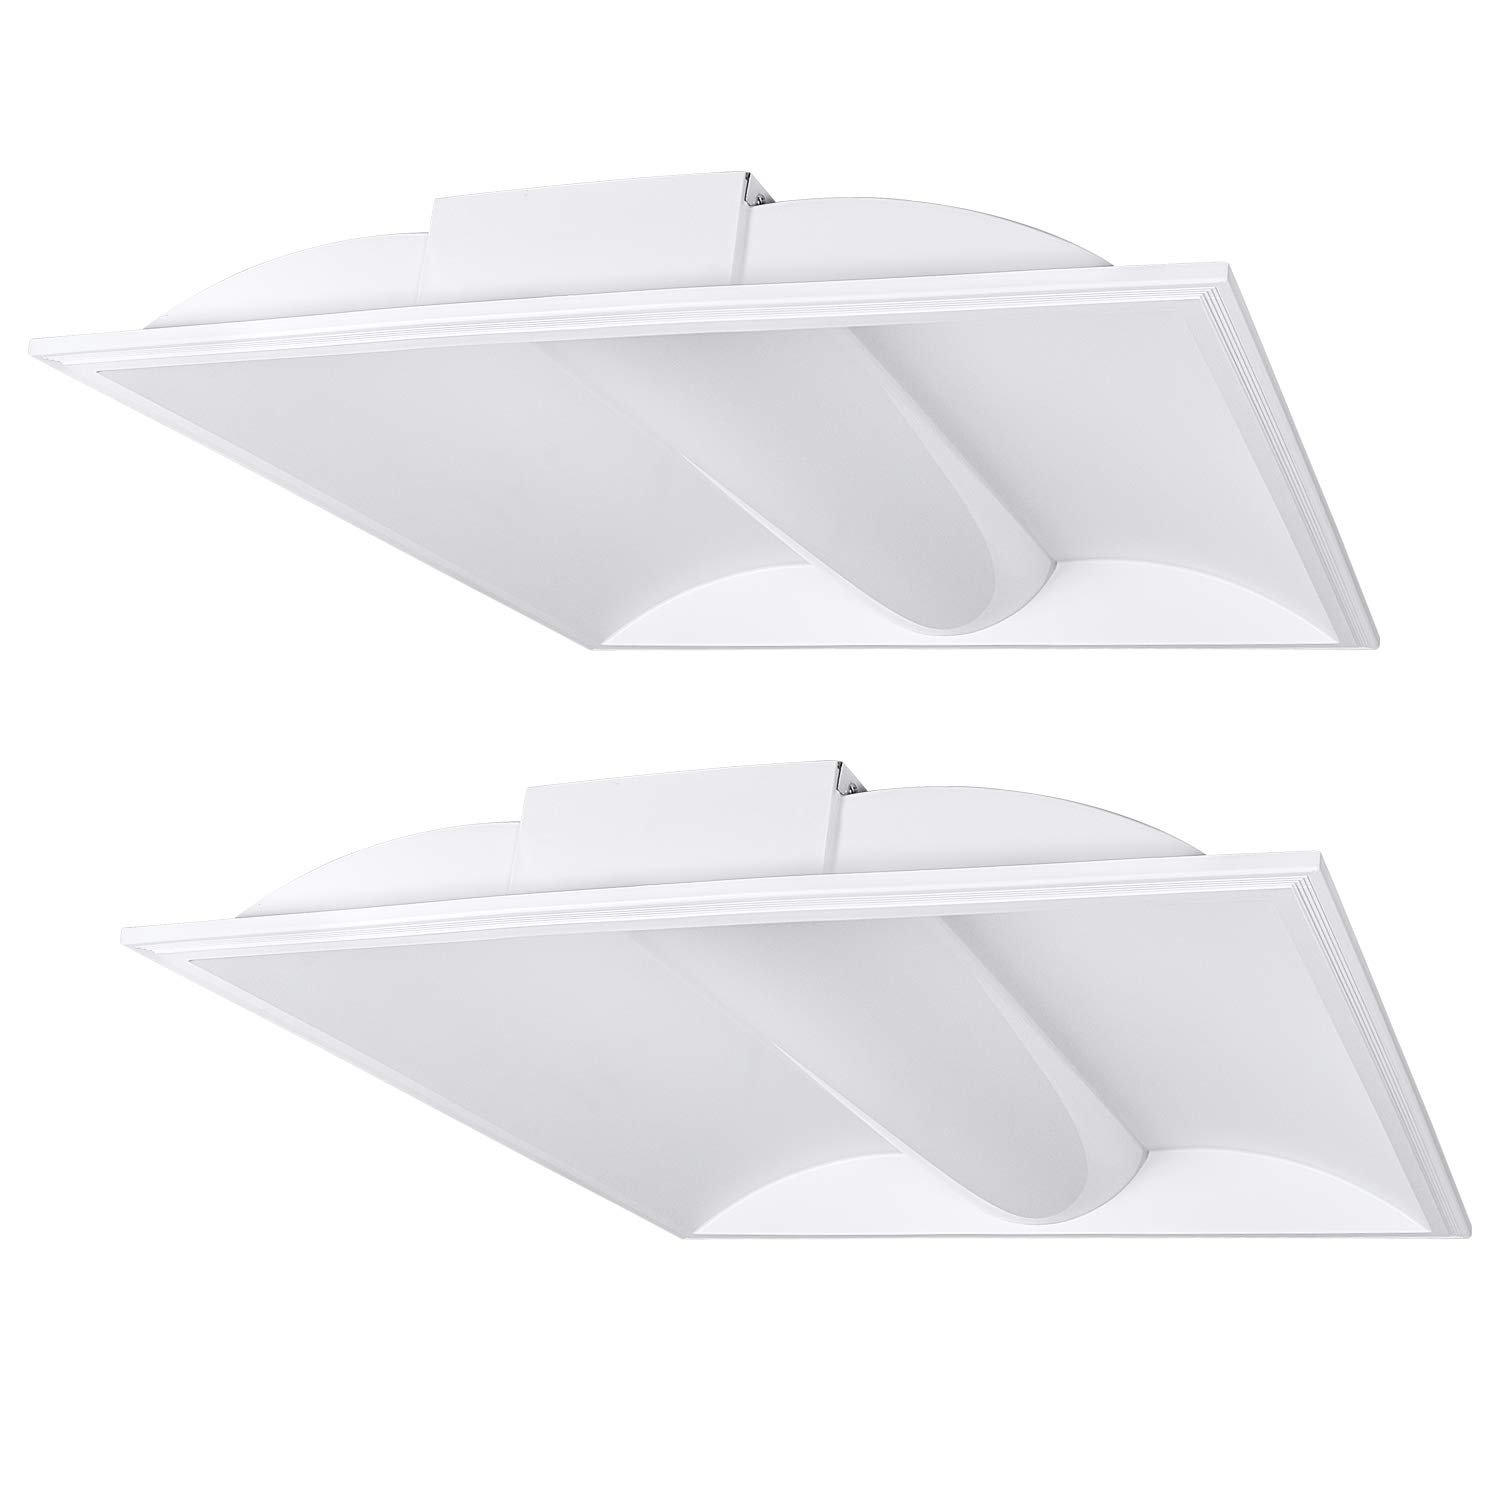 Luxrite Troffer 2x2 LED Panel Light 4000K 4000lm Dimmable UL DLC Listed